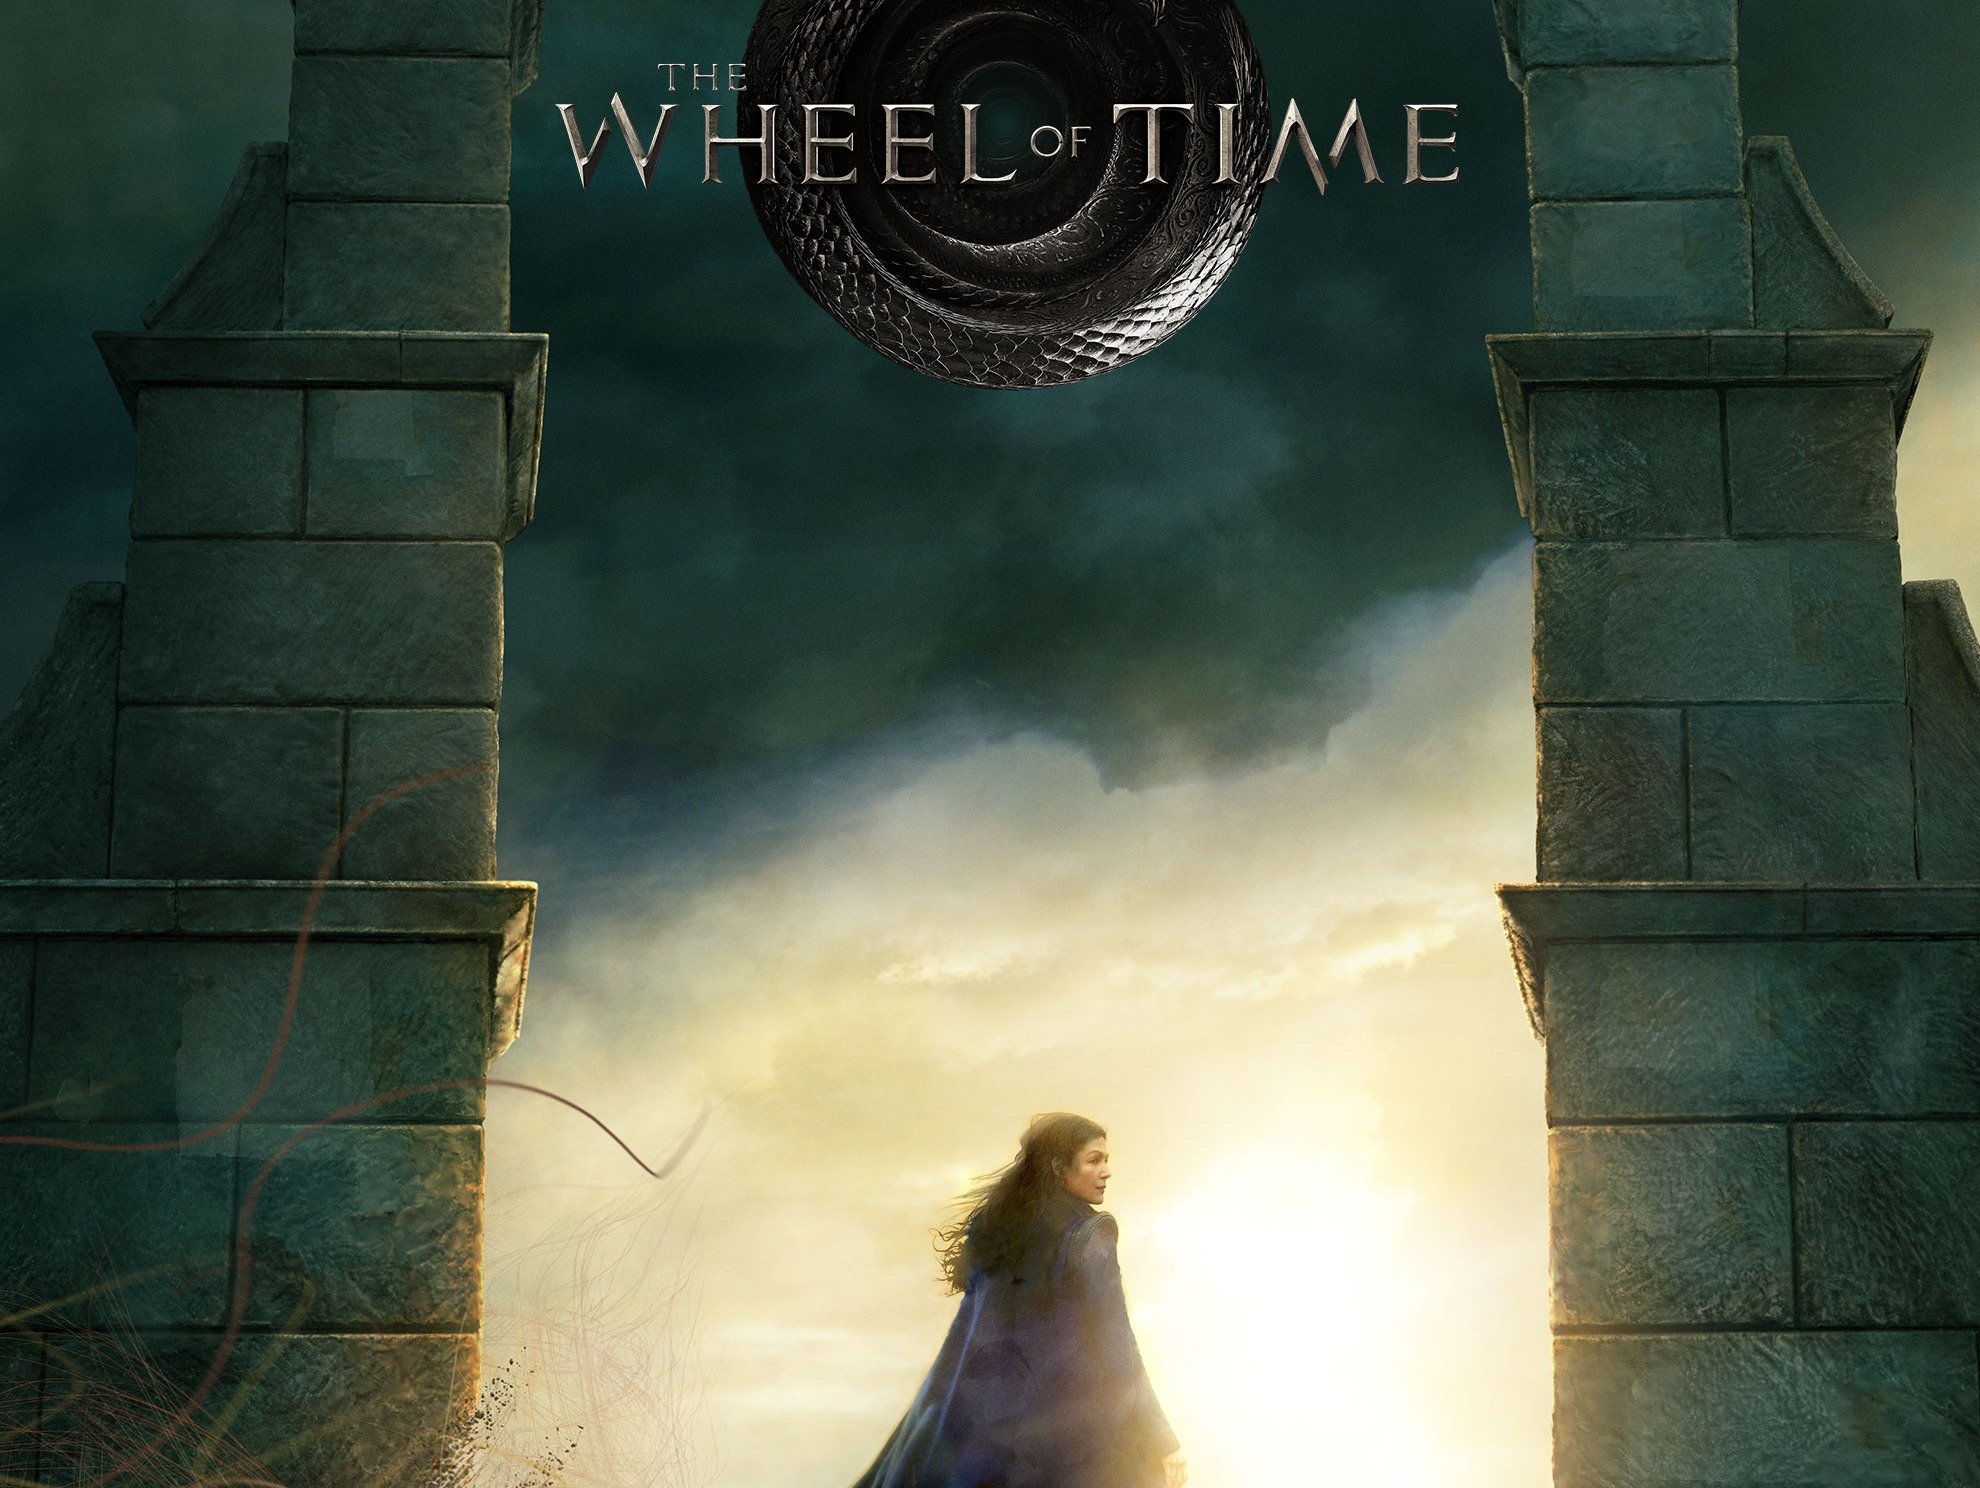 Poster for Amazon's Wheel of Time series shows Rosamund Pike's Moiraine standing in an archway